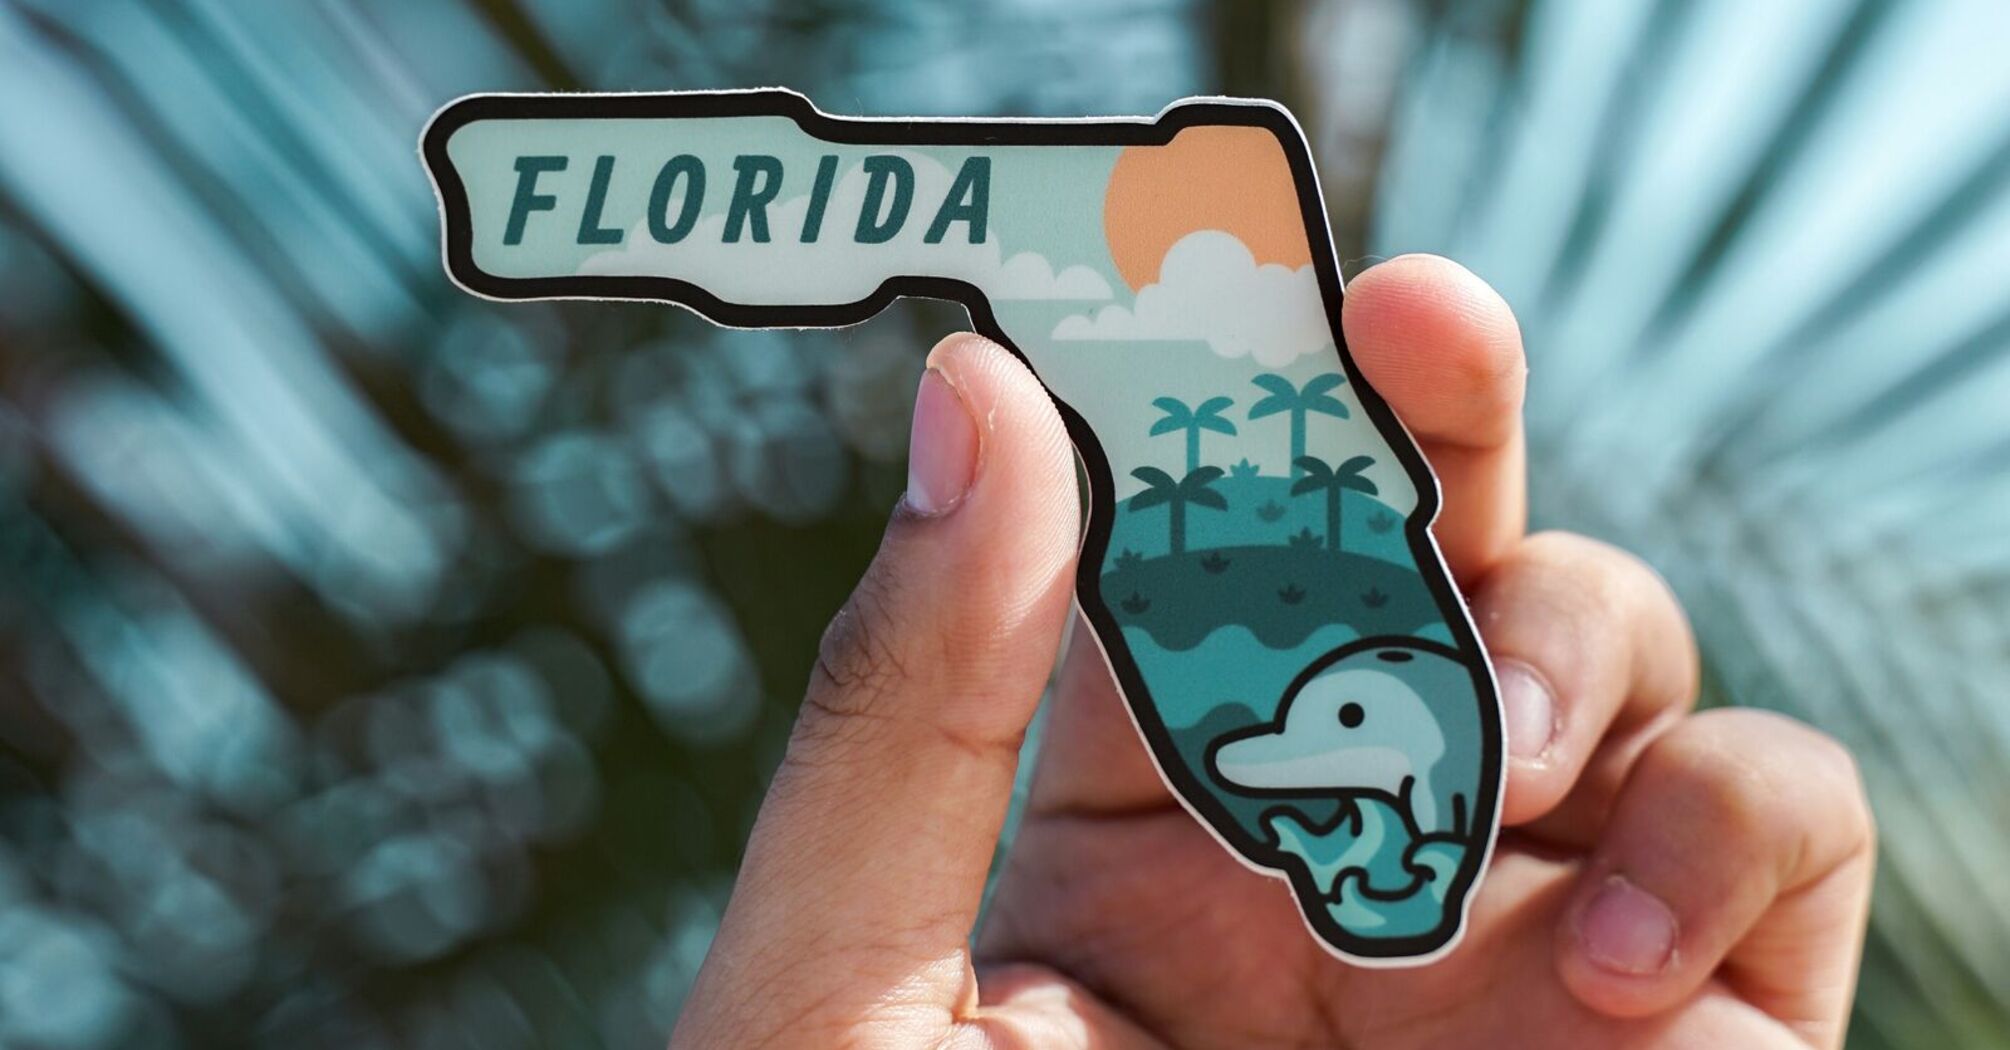 A hand holding a Florida-shaped sticker with a dolphin and palm trees design, with blurred palm fronds in the background